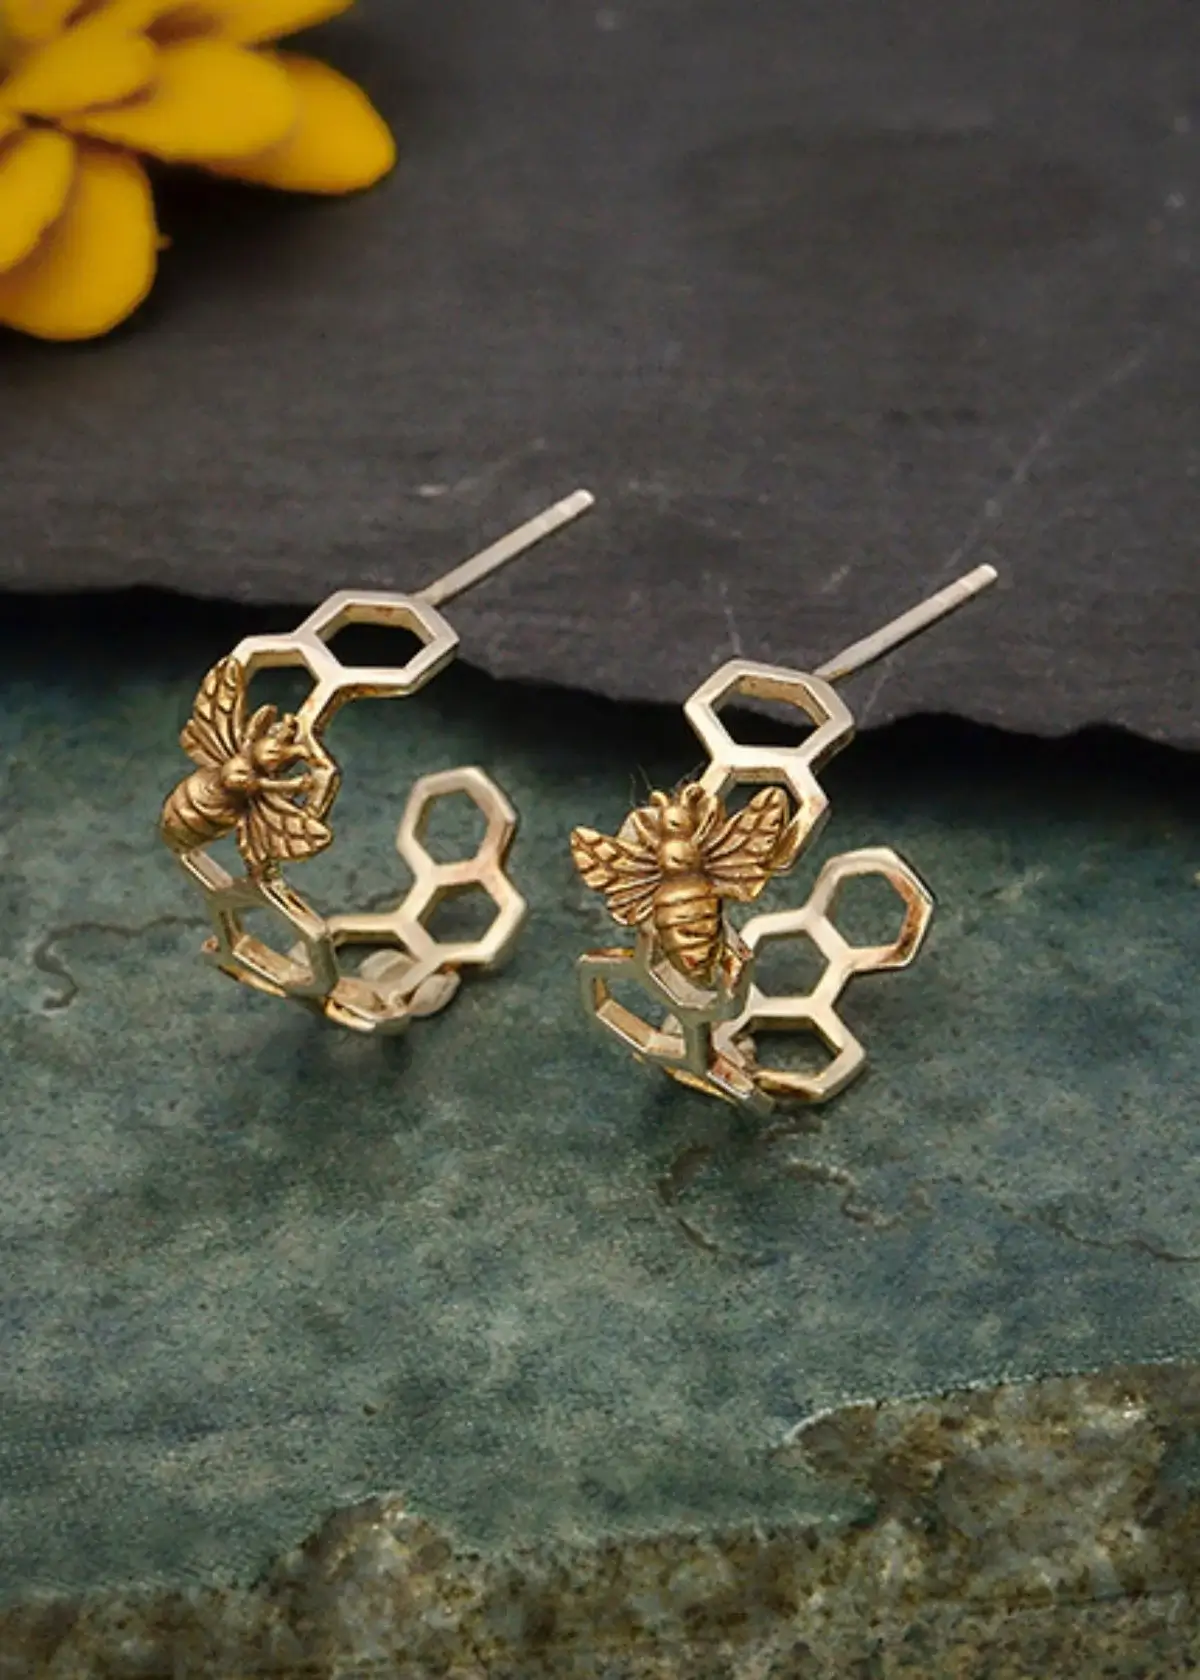 How to Choose the Right Honeycomb Earrings?